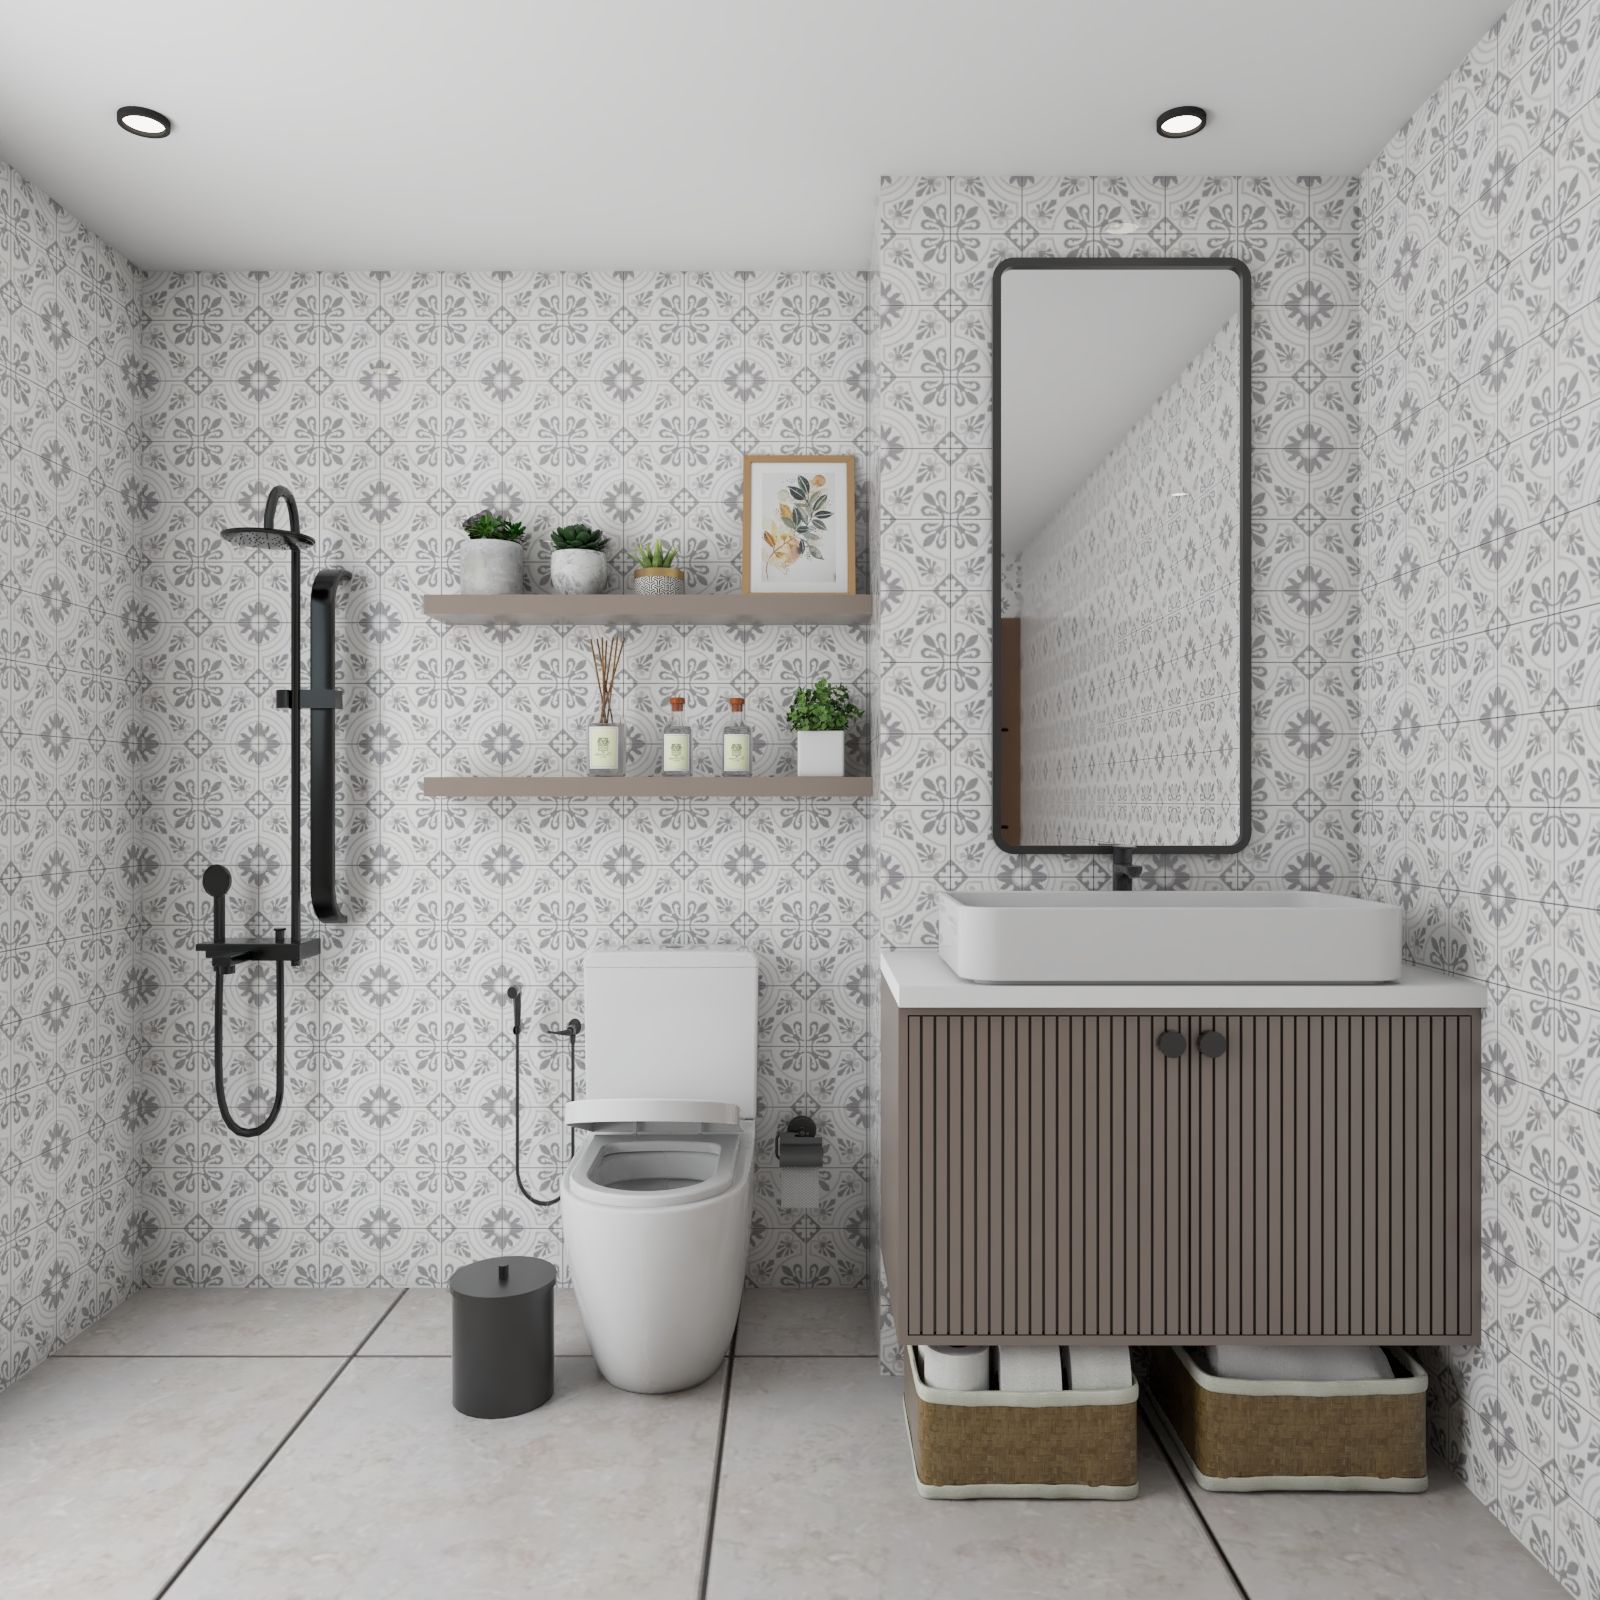 White And Grey Contemporary Bathroom Design WIth Black Sanitary Fittings